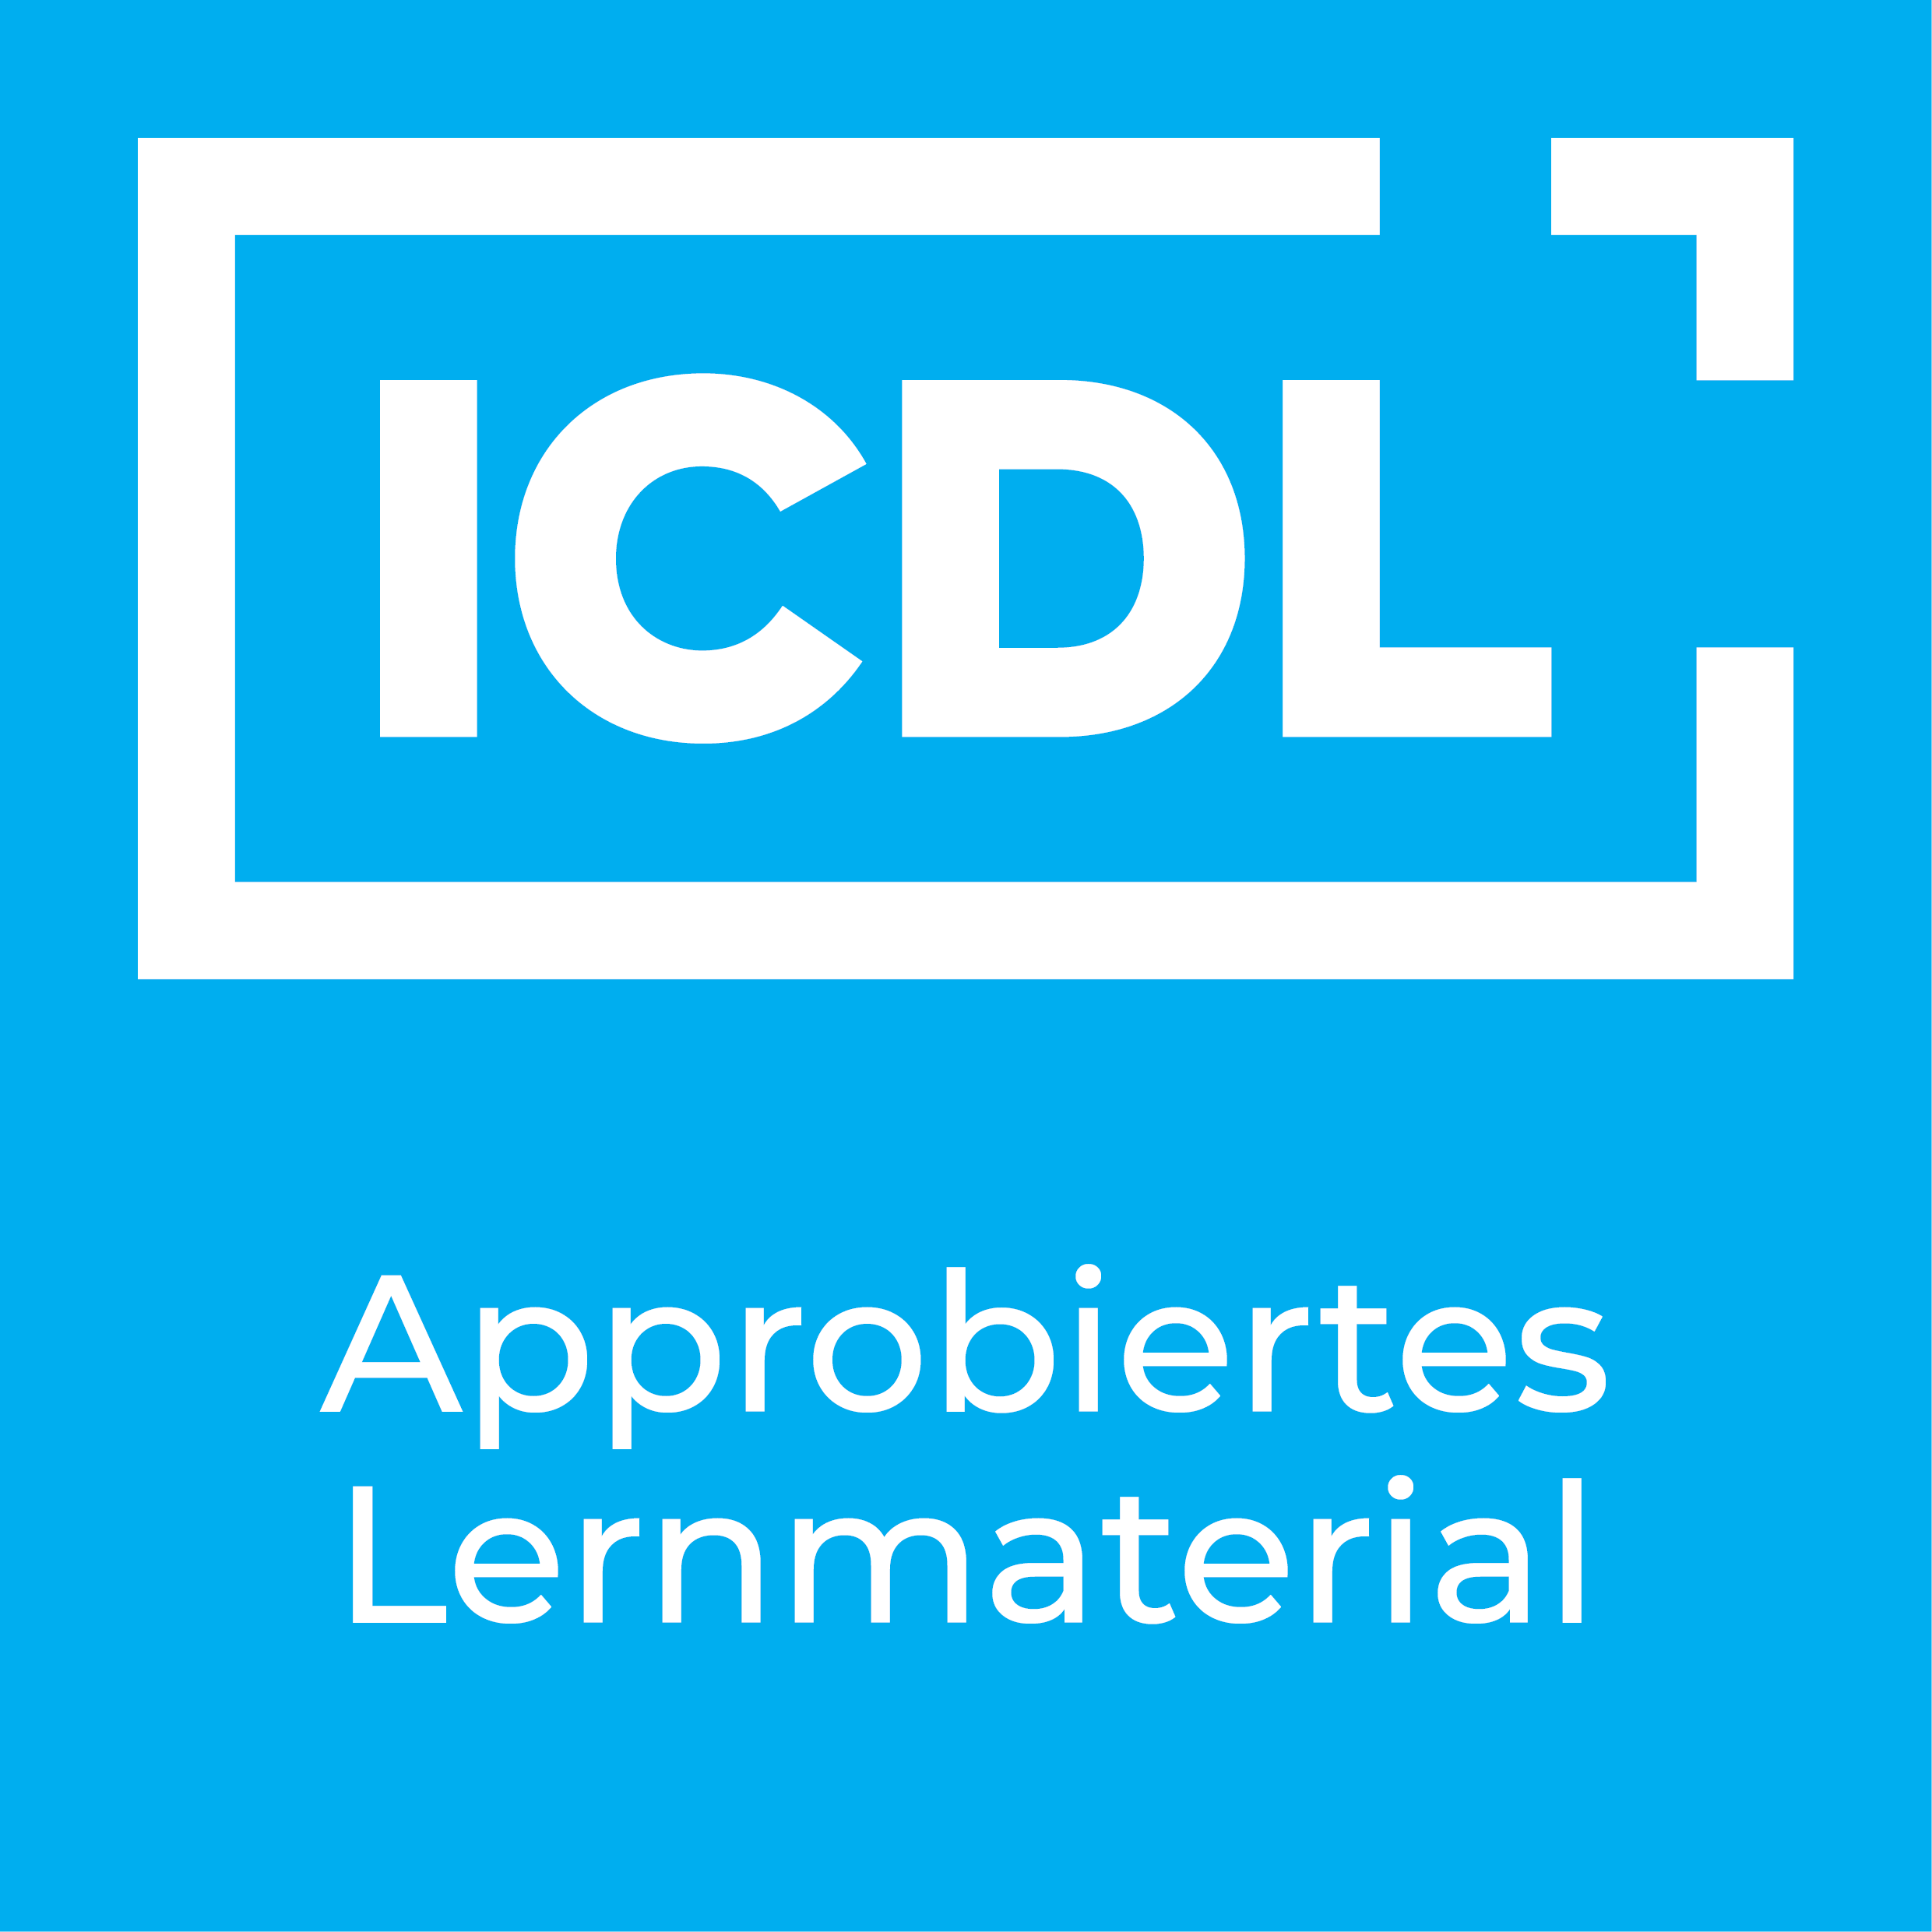 Approbiertes ICDL Lernmaterial Logo